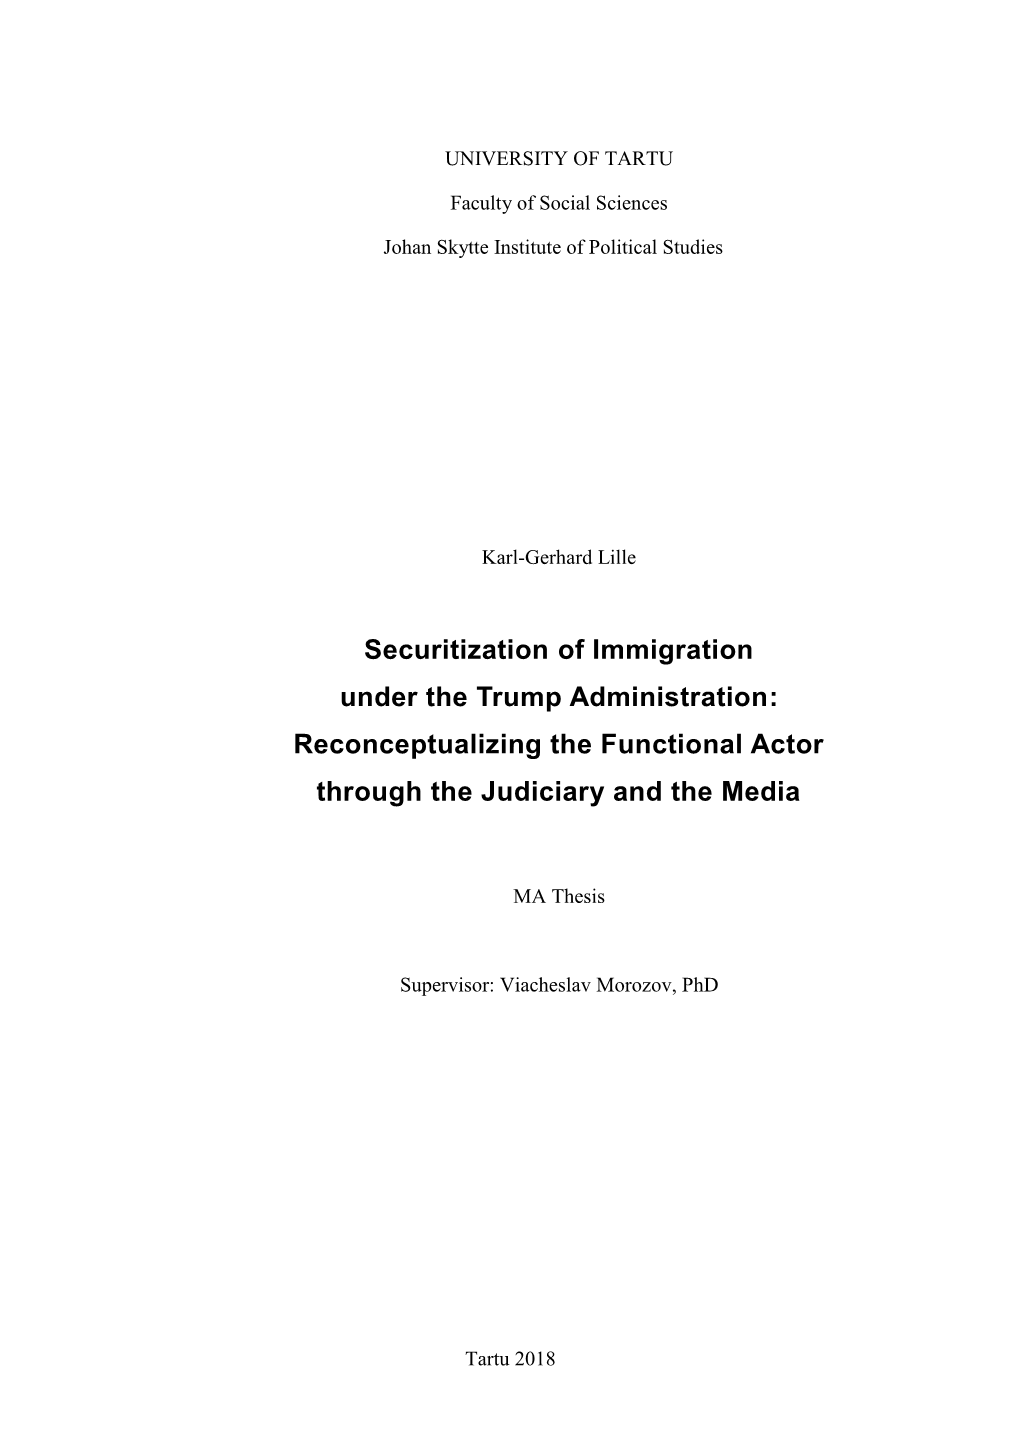 Securitization of Immigration Under the Trump Administration: Reconceptualizing the Functional Actor Through the Judiciary and the Media